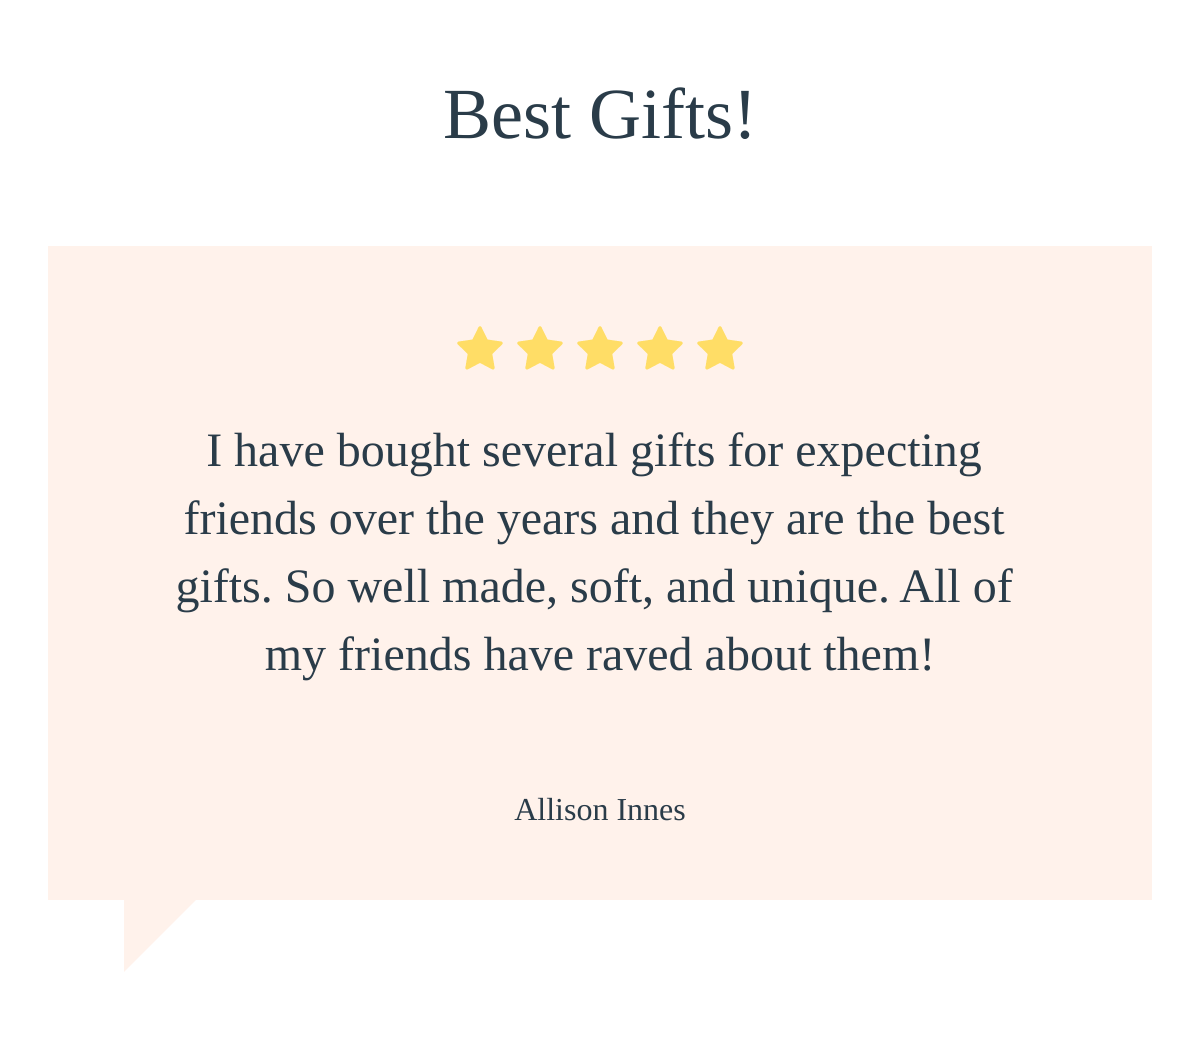  Best Gifts! I have bought several gifts for expecting friends over the years and they are the best gifts. So well made, soft, and unique. All of my friends have raved about them! Allison Innes